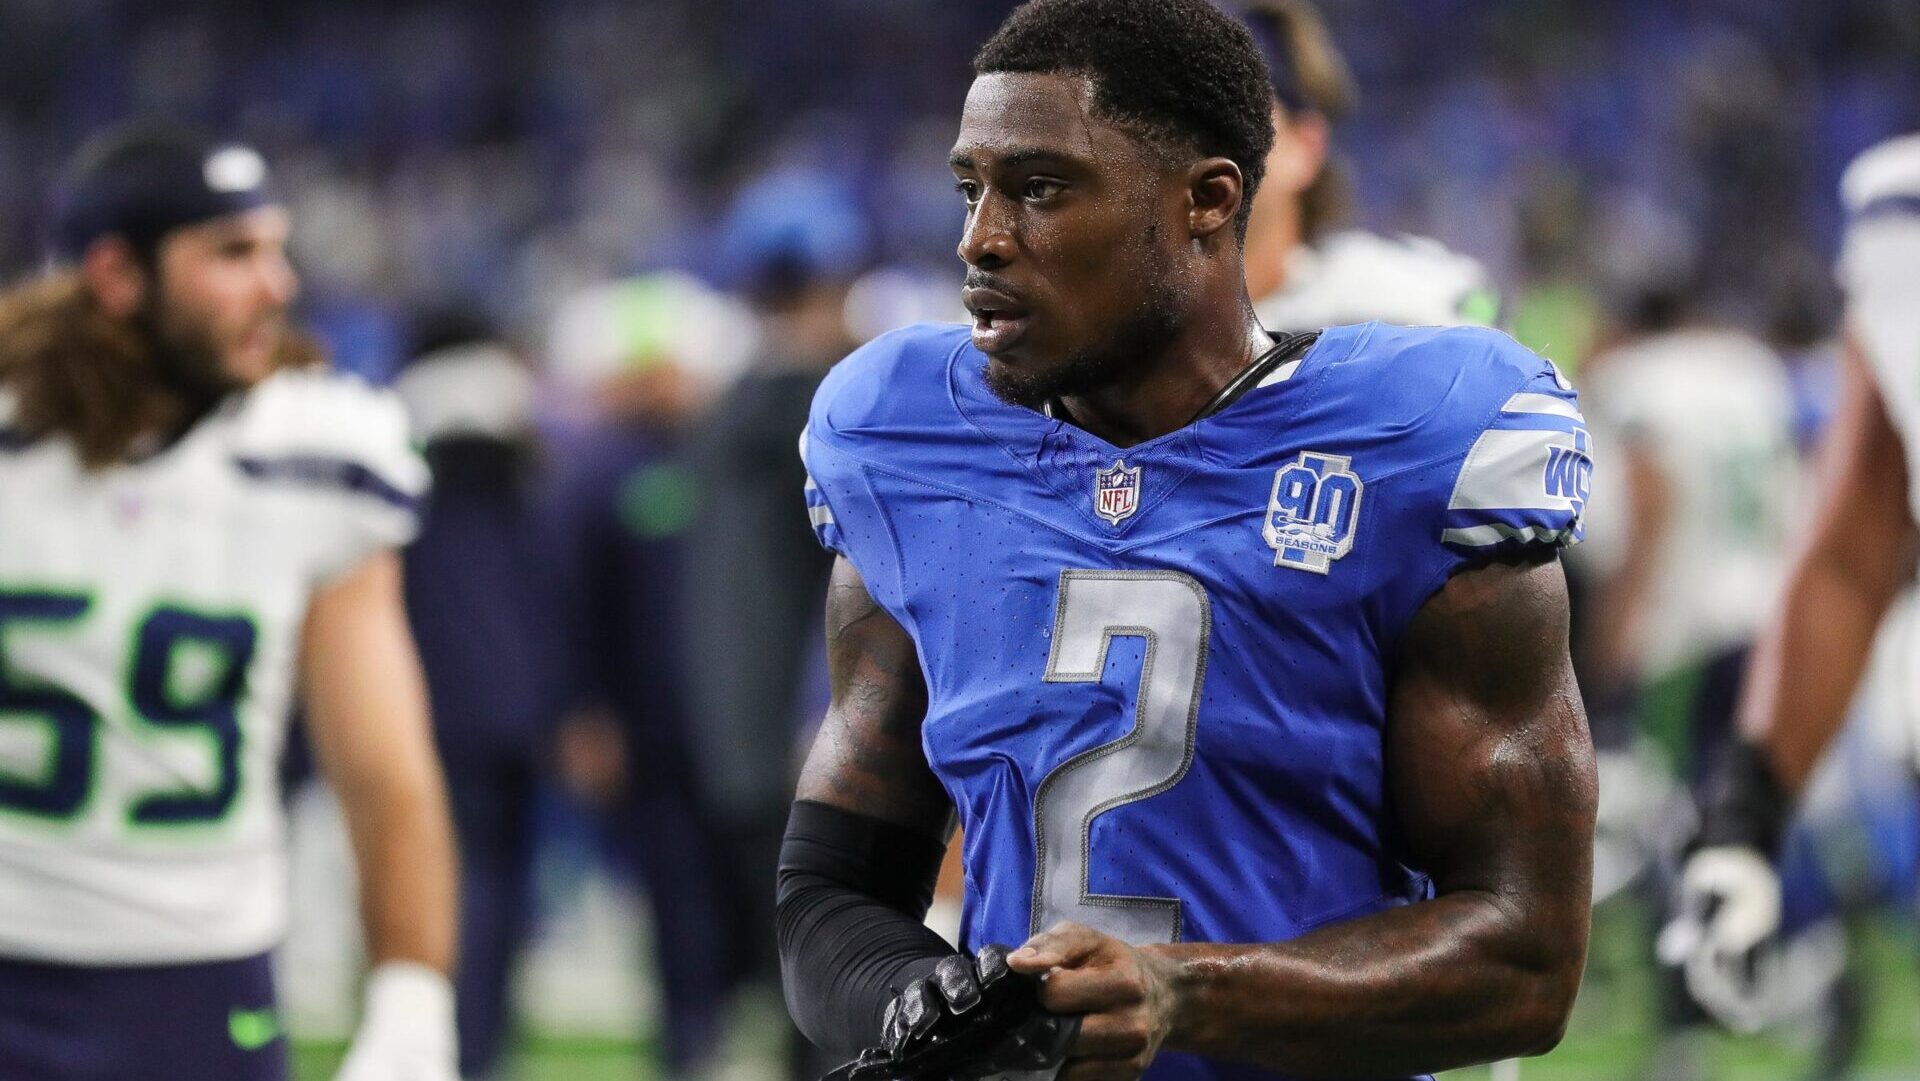 Improved Depth Will Help Detroit Lions Overcome Injury Woes